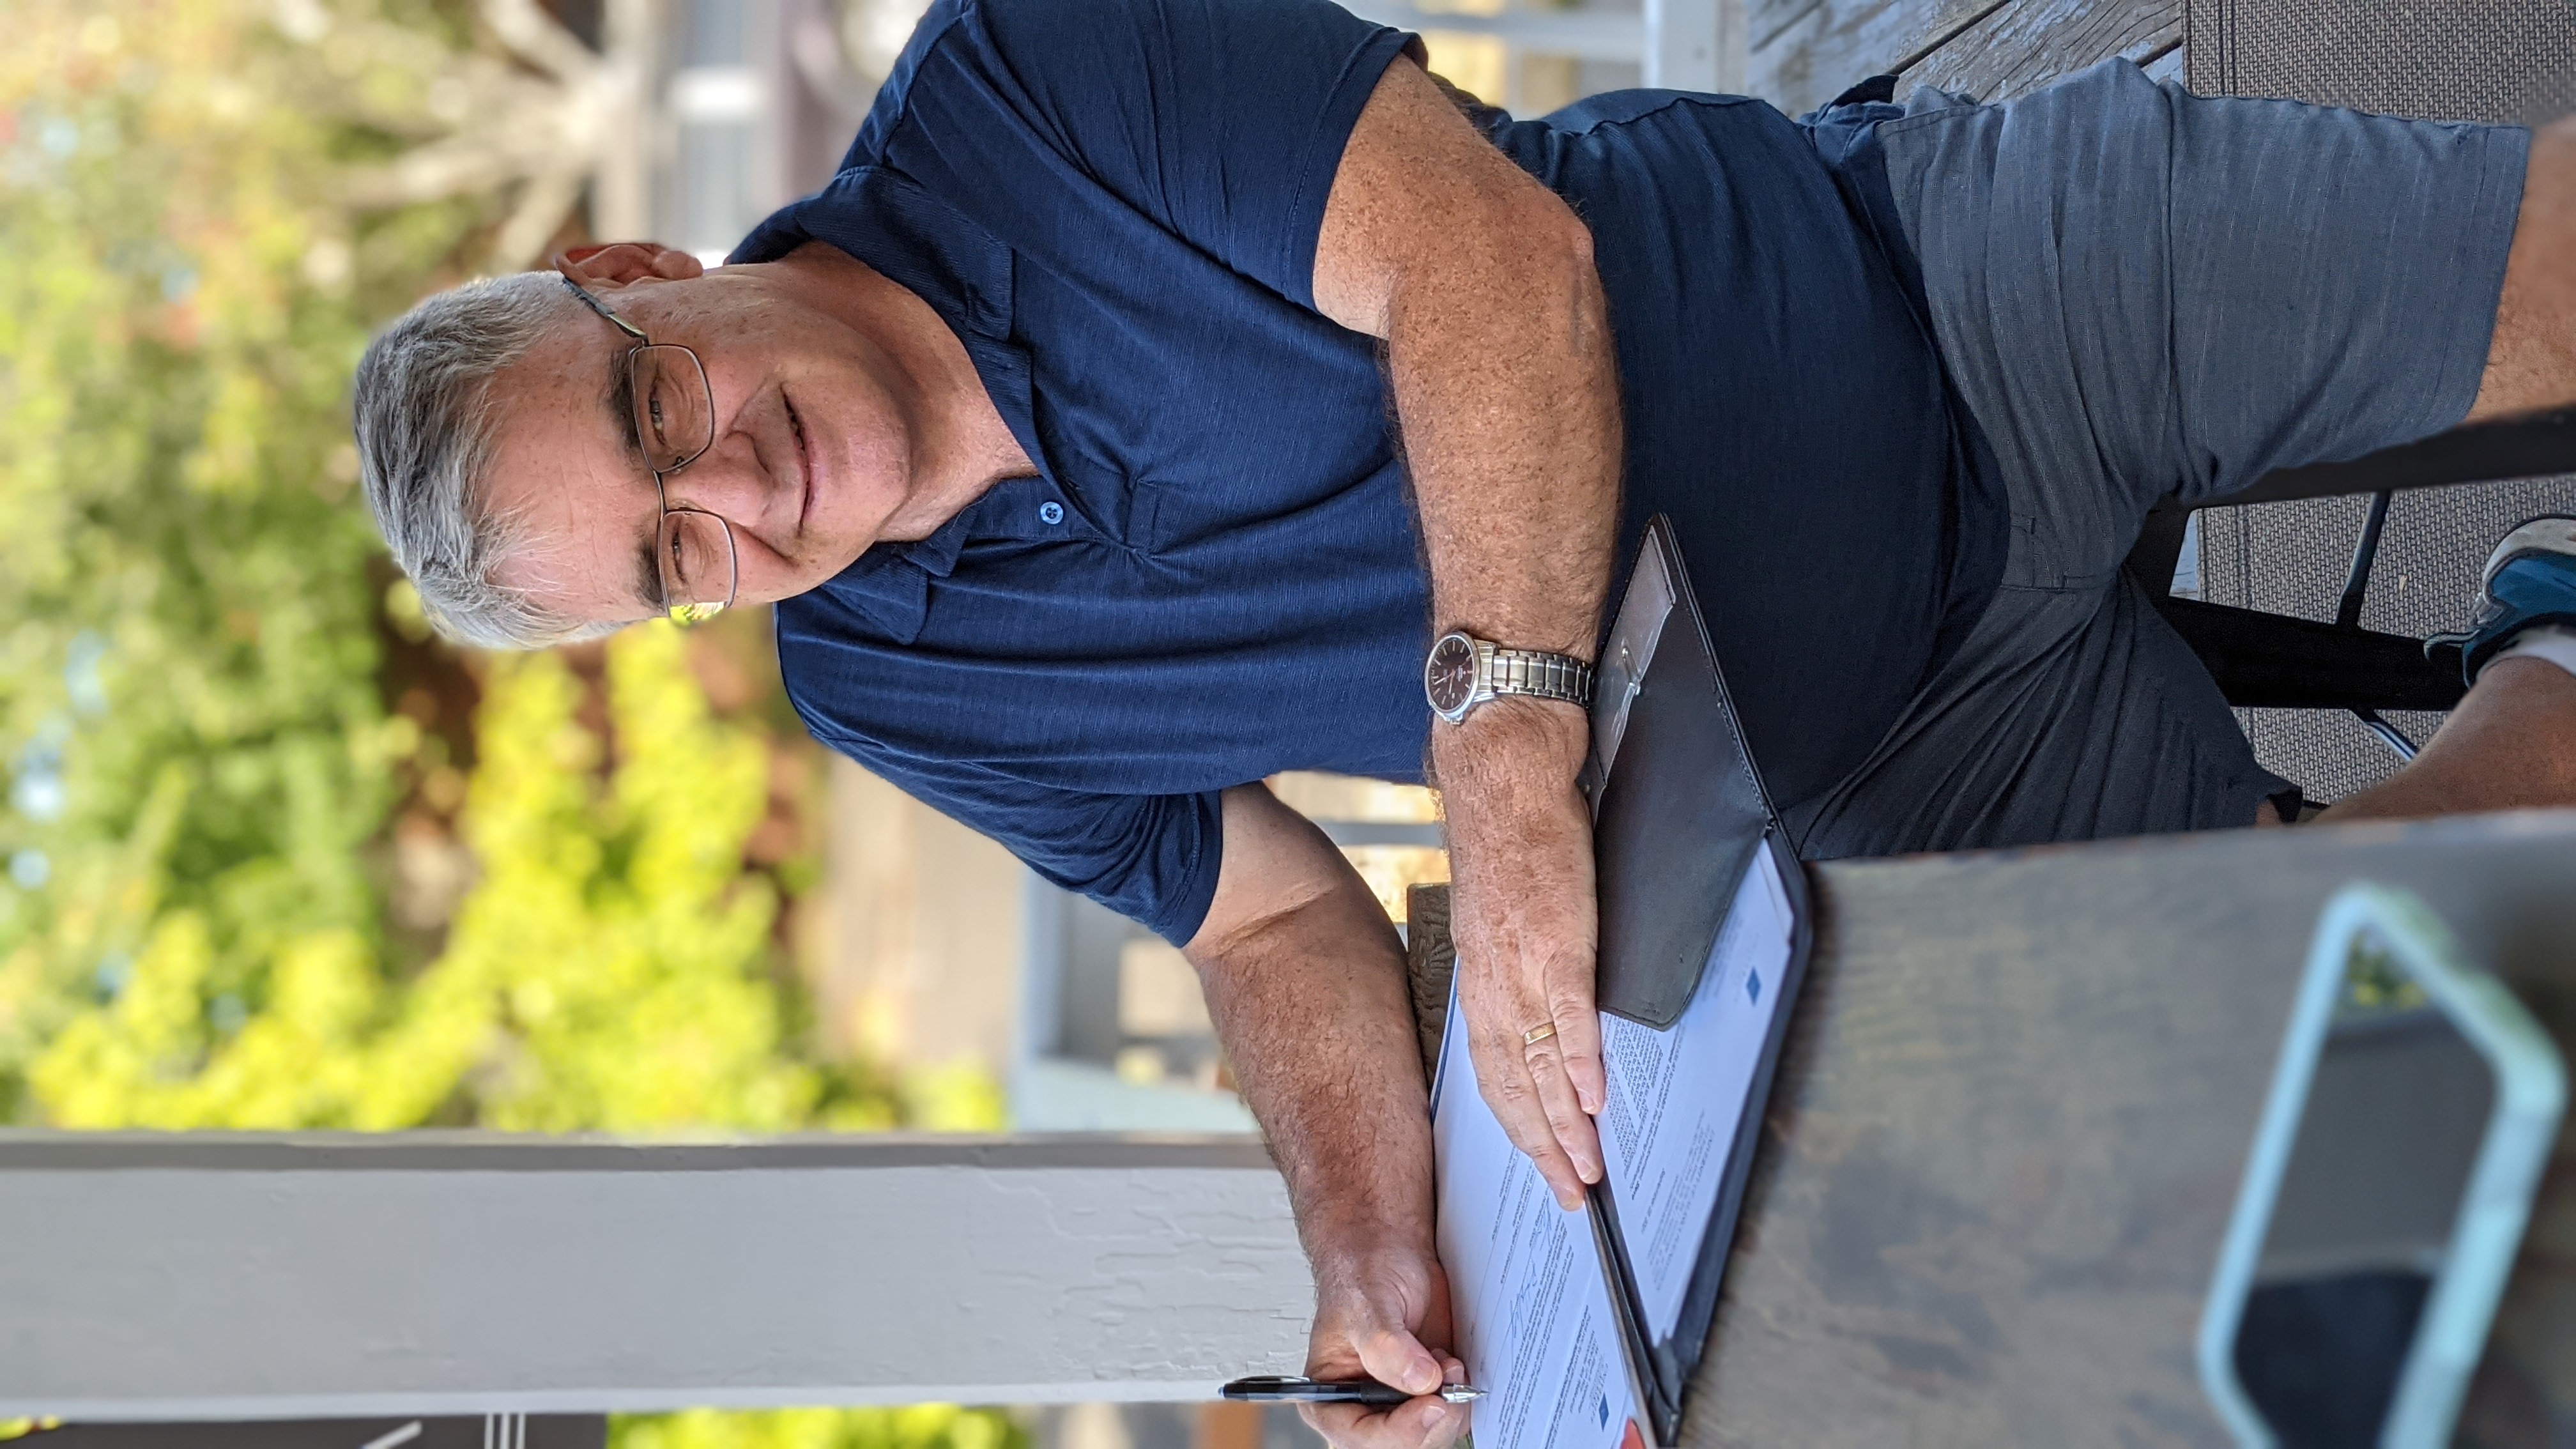 Steve Holmberg signs an agreement with the UA Foundation on Sept. 23, 2021, in Camas, Washington. The agreement outlines how he will fund the Steve and Cynthia Holmberg Choral Director Endowment during the coming decade. UAF photo by Megan Bean.